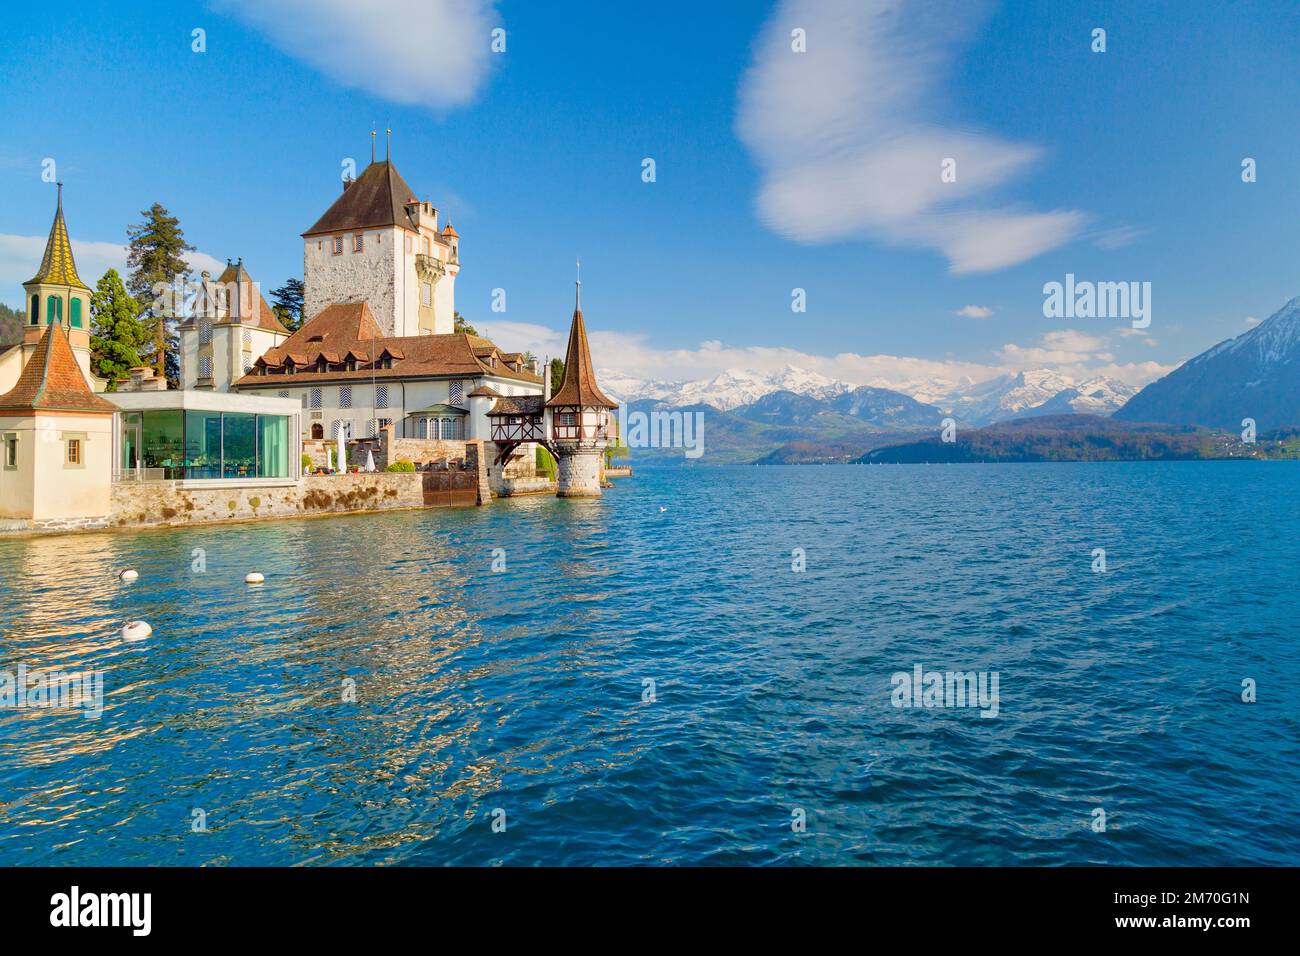 Oberhofen Castle at Lake Thunersee in swiss Alps, Switzerland Stock Photo